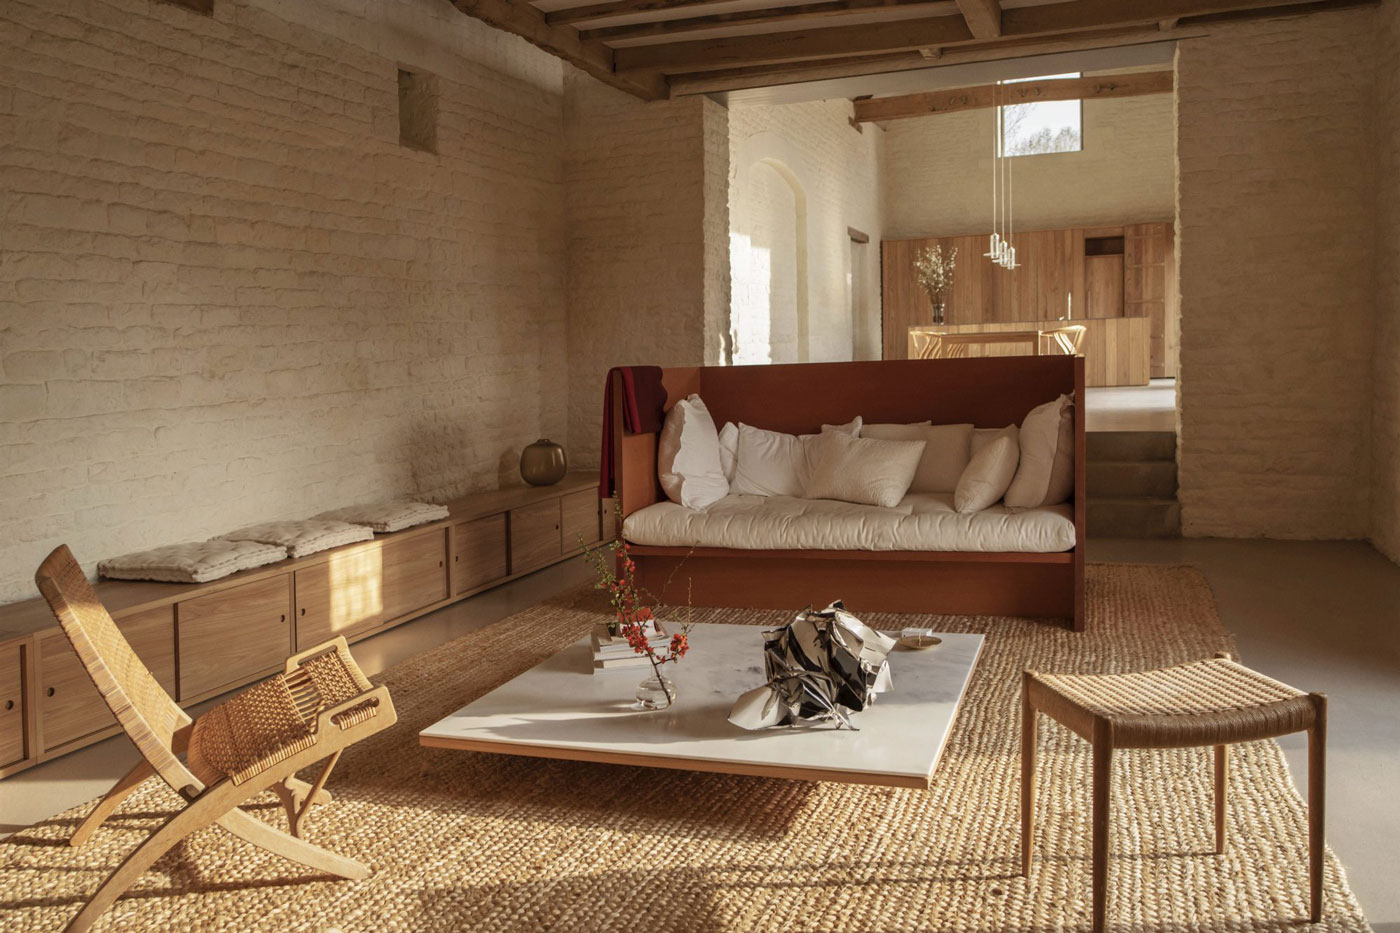 Harry Styles Makes Himself at Home in John Pawson’s Minimalist Barn Tim Walker Better Homes and Gardens